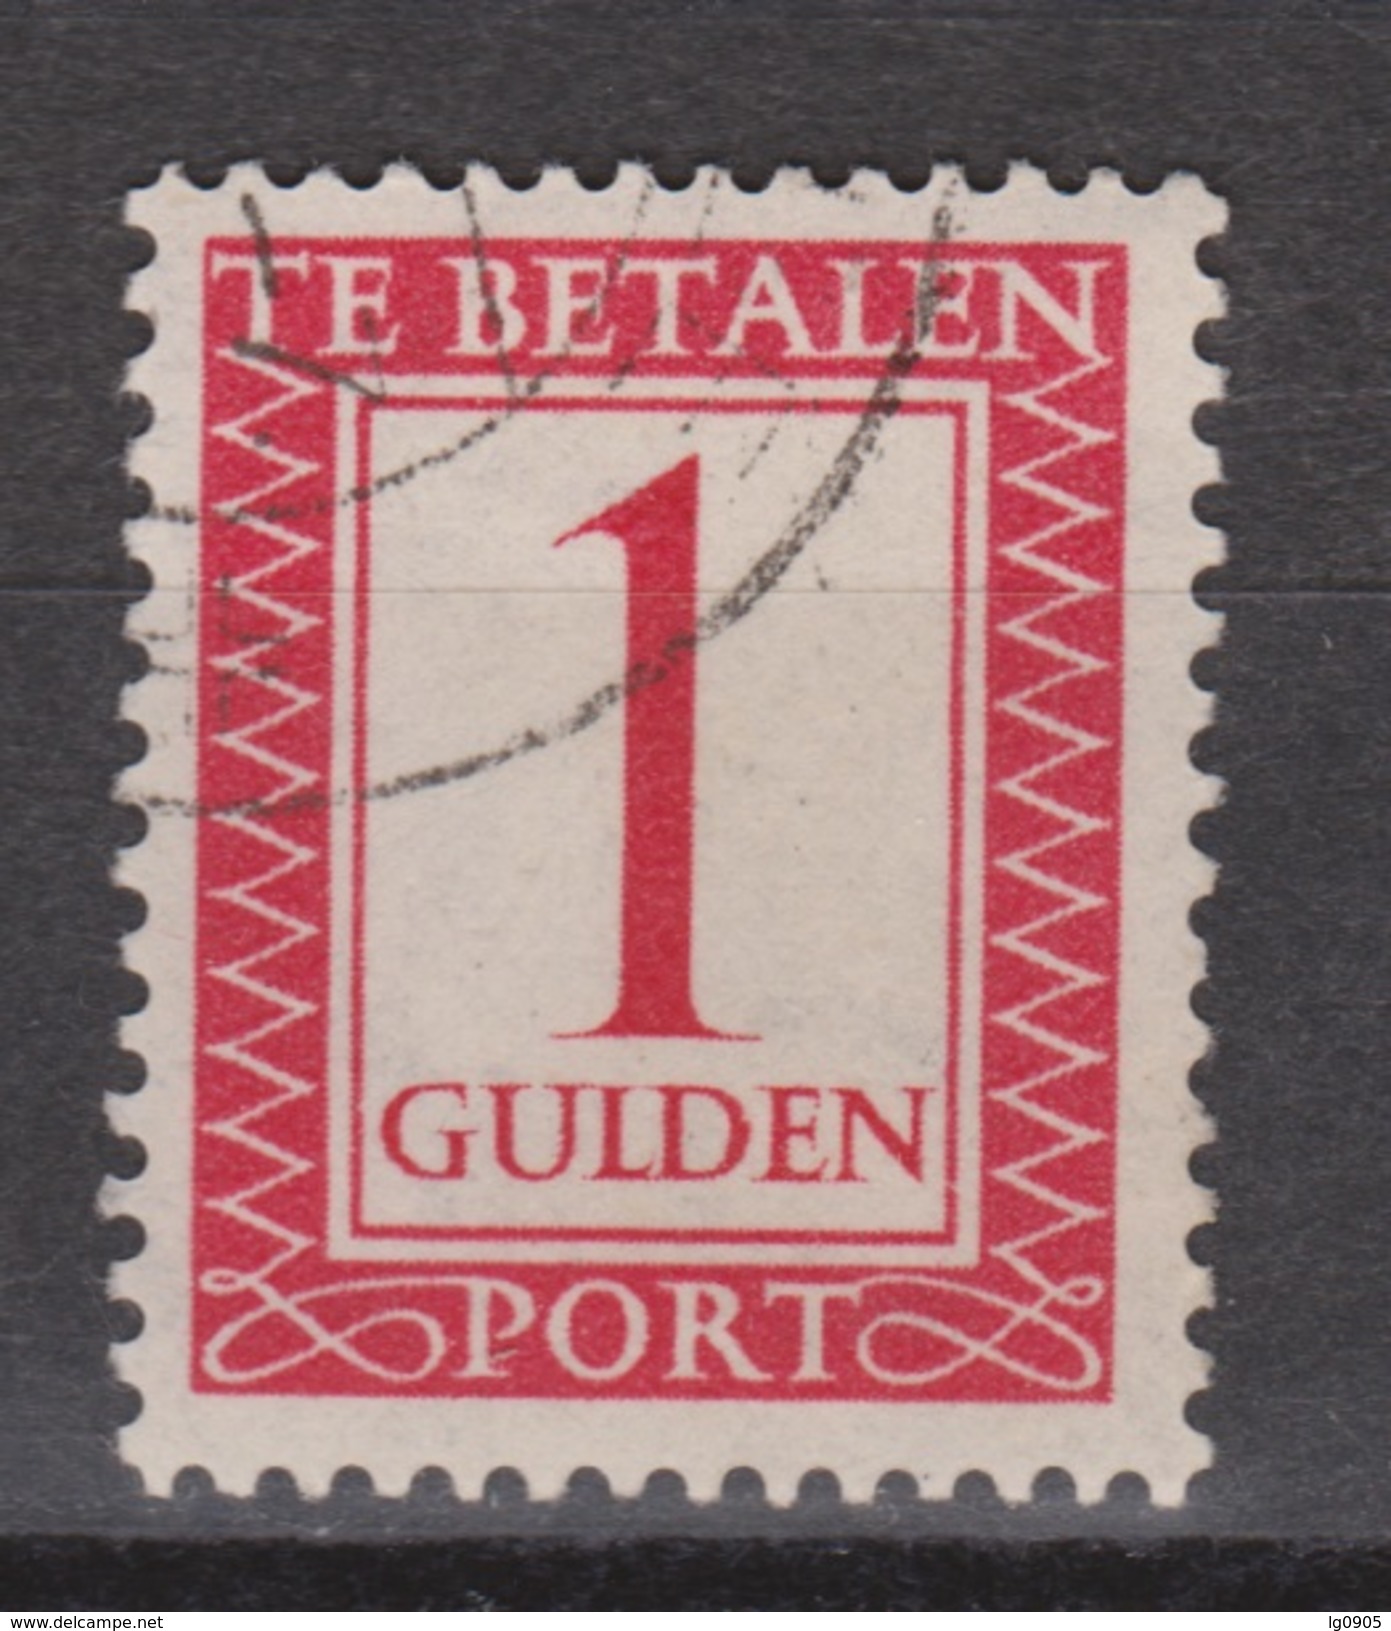 NVPH Nederland Netherlands Holanda Pays Bas Port 105 Used Timbre-taxe, Postmarke, Sellos De Correos NOW MANY DUE STAMPS - Strafportzegels